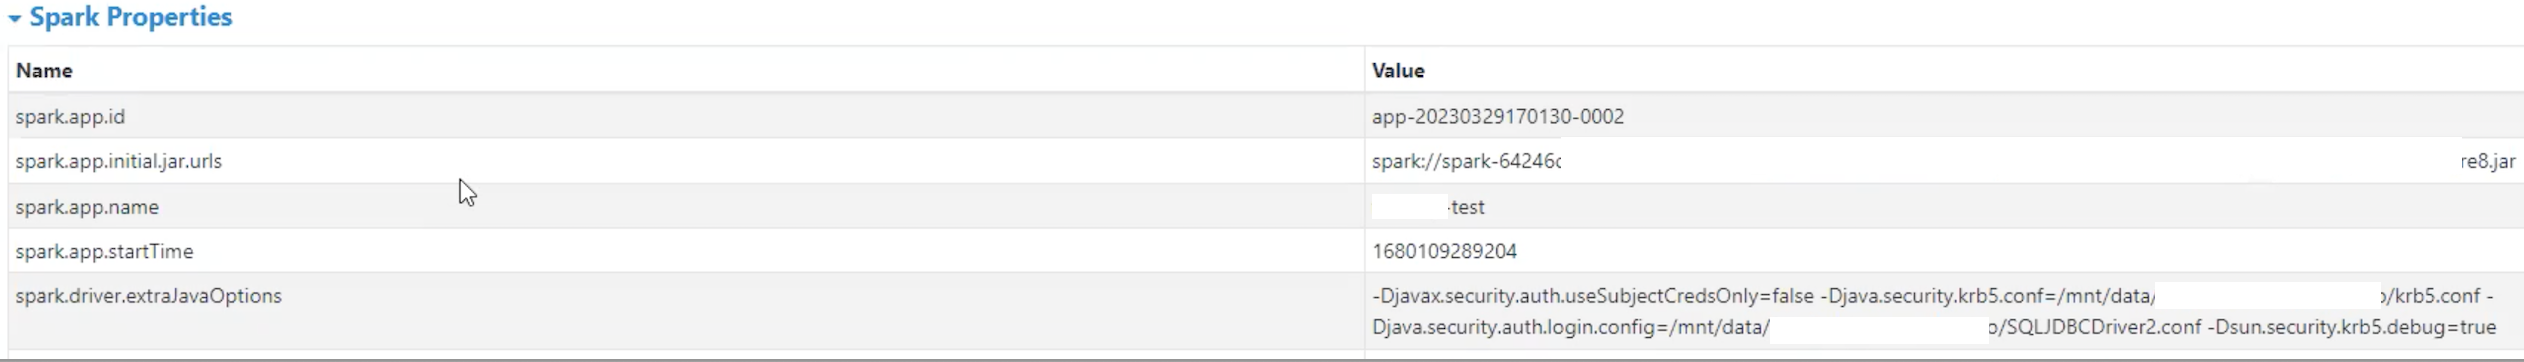 Spark_Web_UI_-_Environment_-_Spark_Properties_-_all_params.png